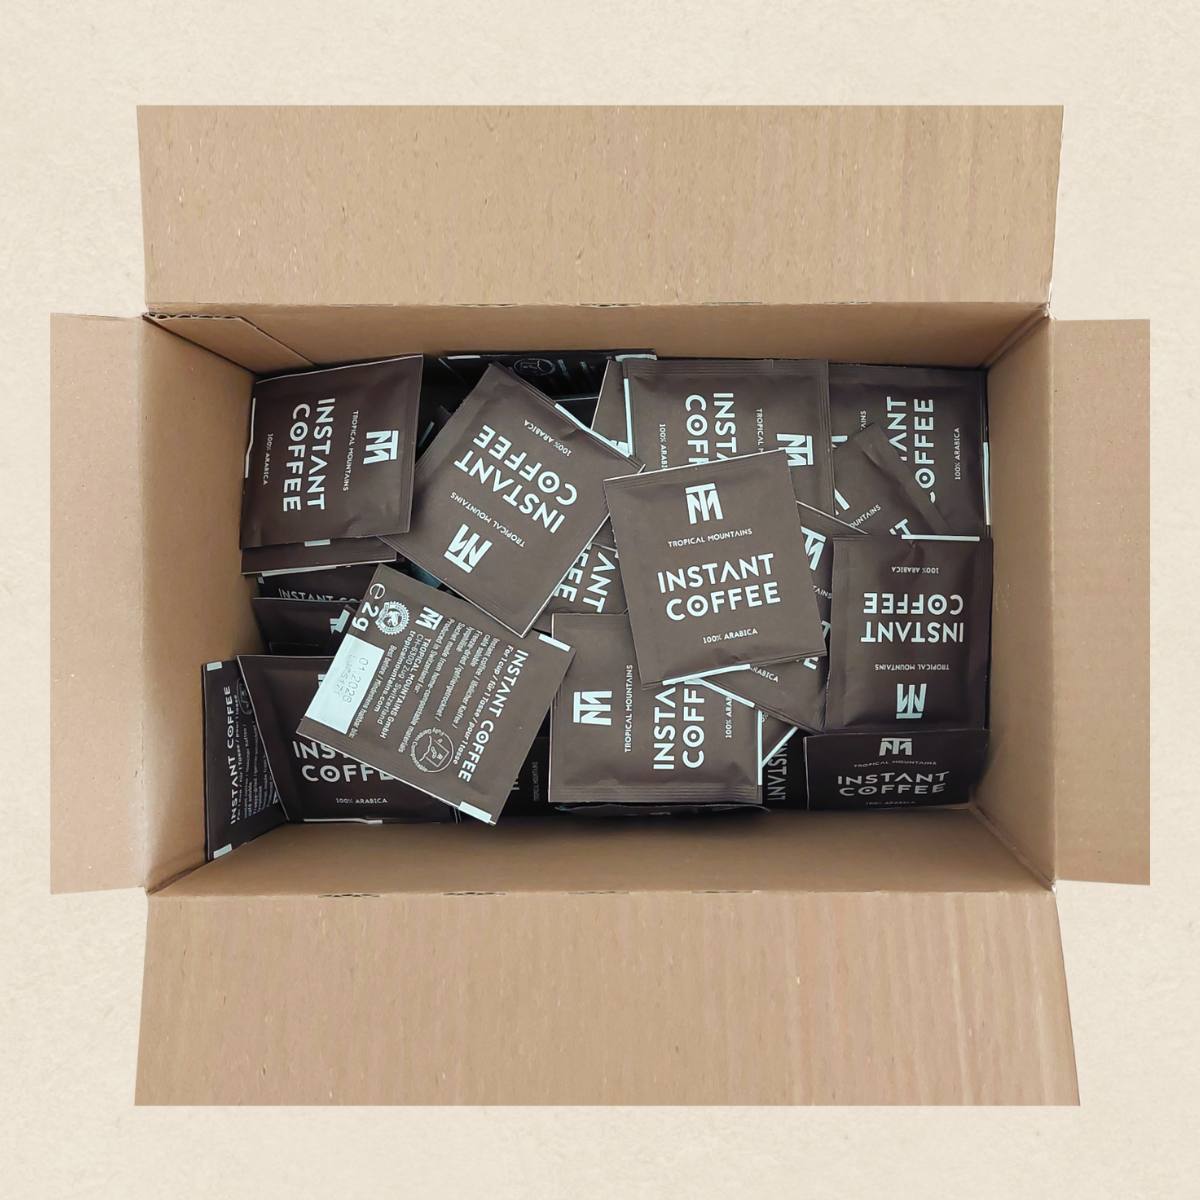 INSTANT COFFEE 100 Sachets home-compostable